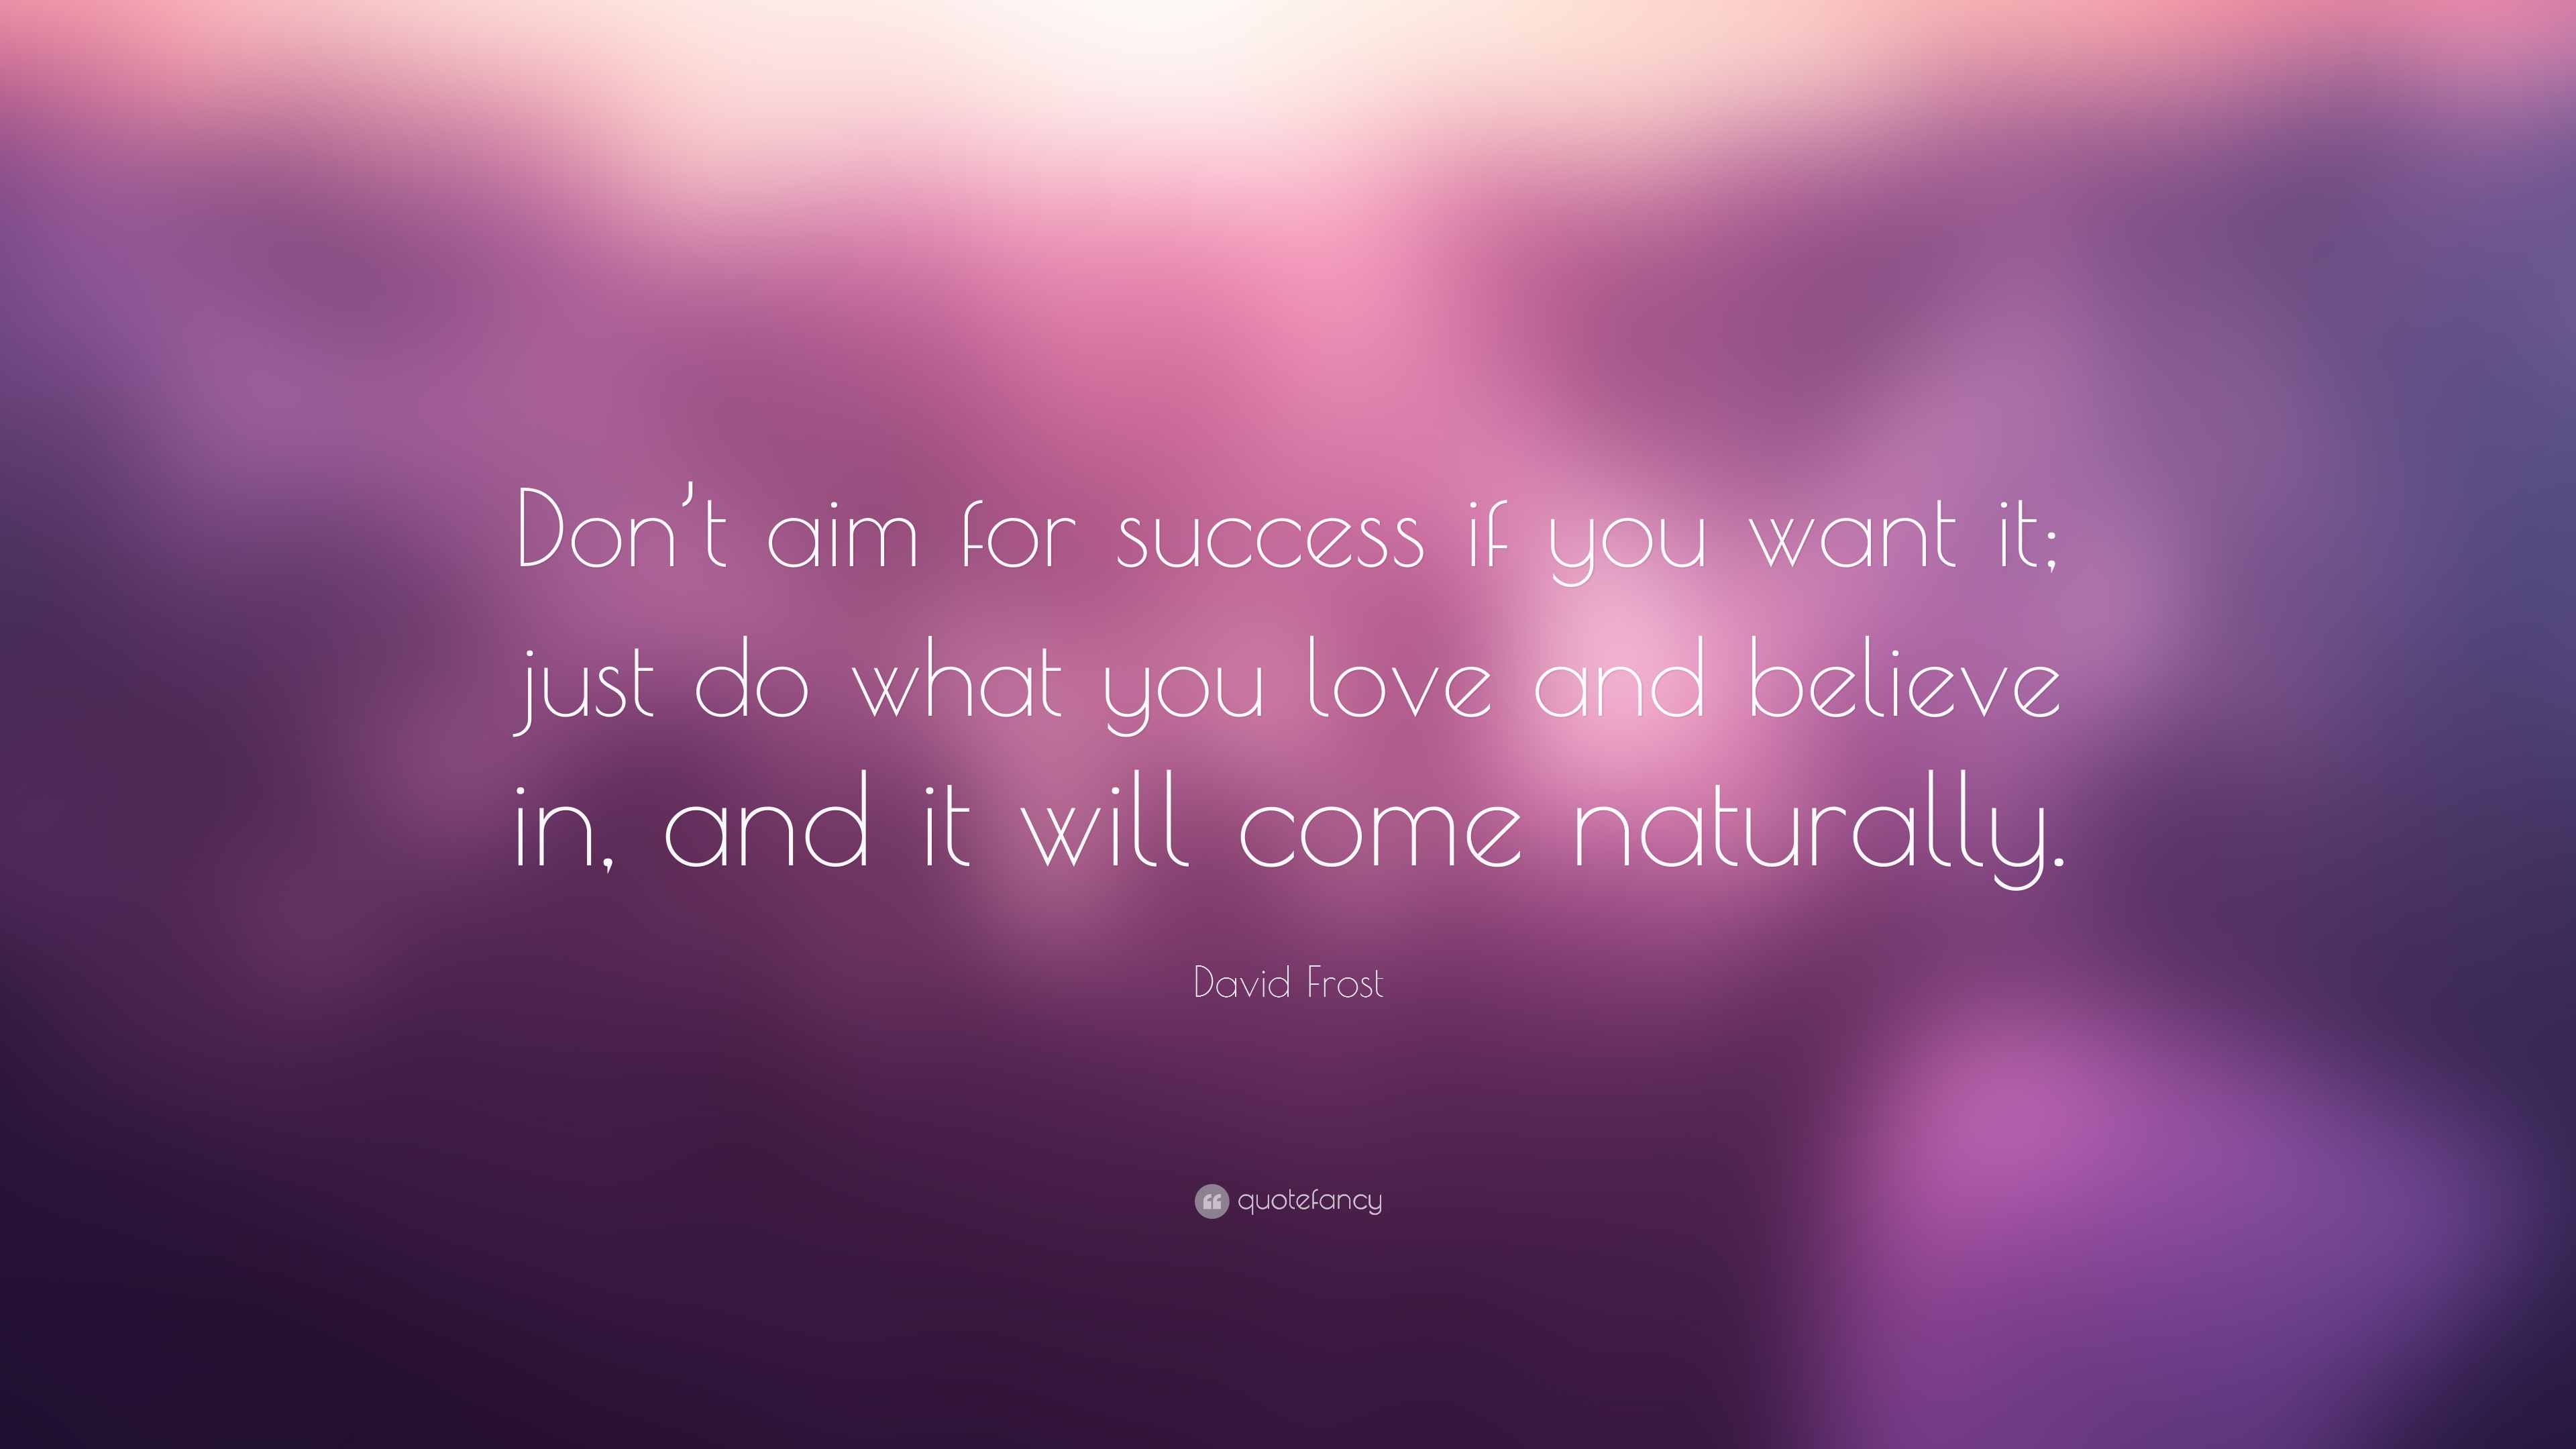 Don’t aim for success if you want it; just do what you love and believe in, and it will come naturally. – David Frost